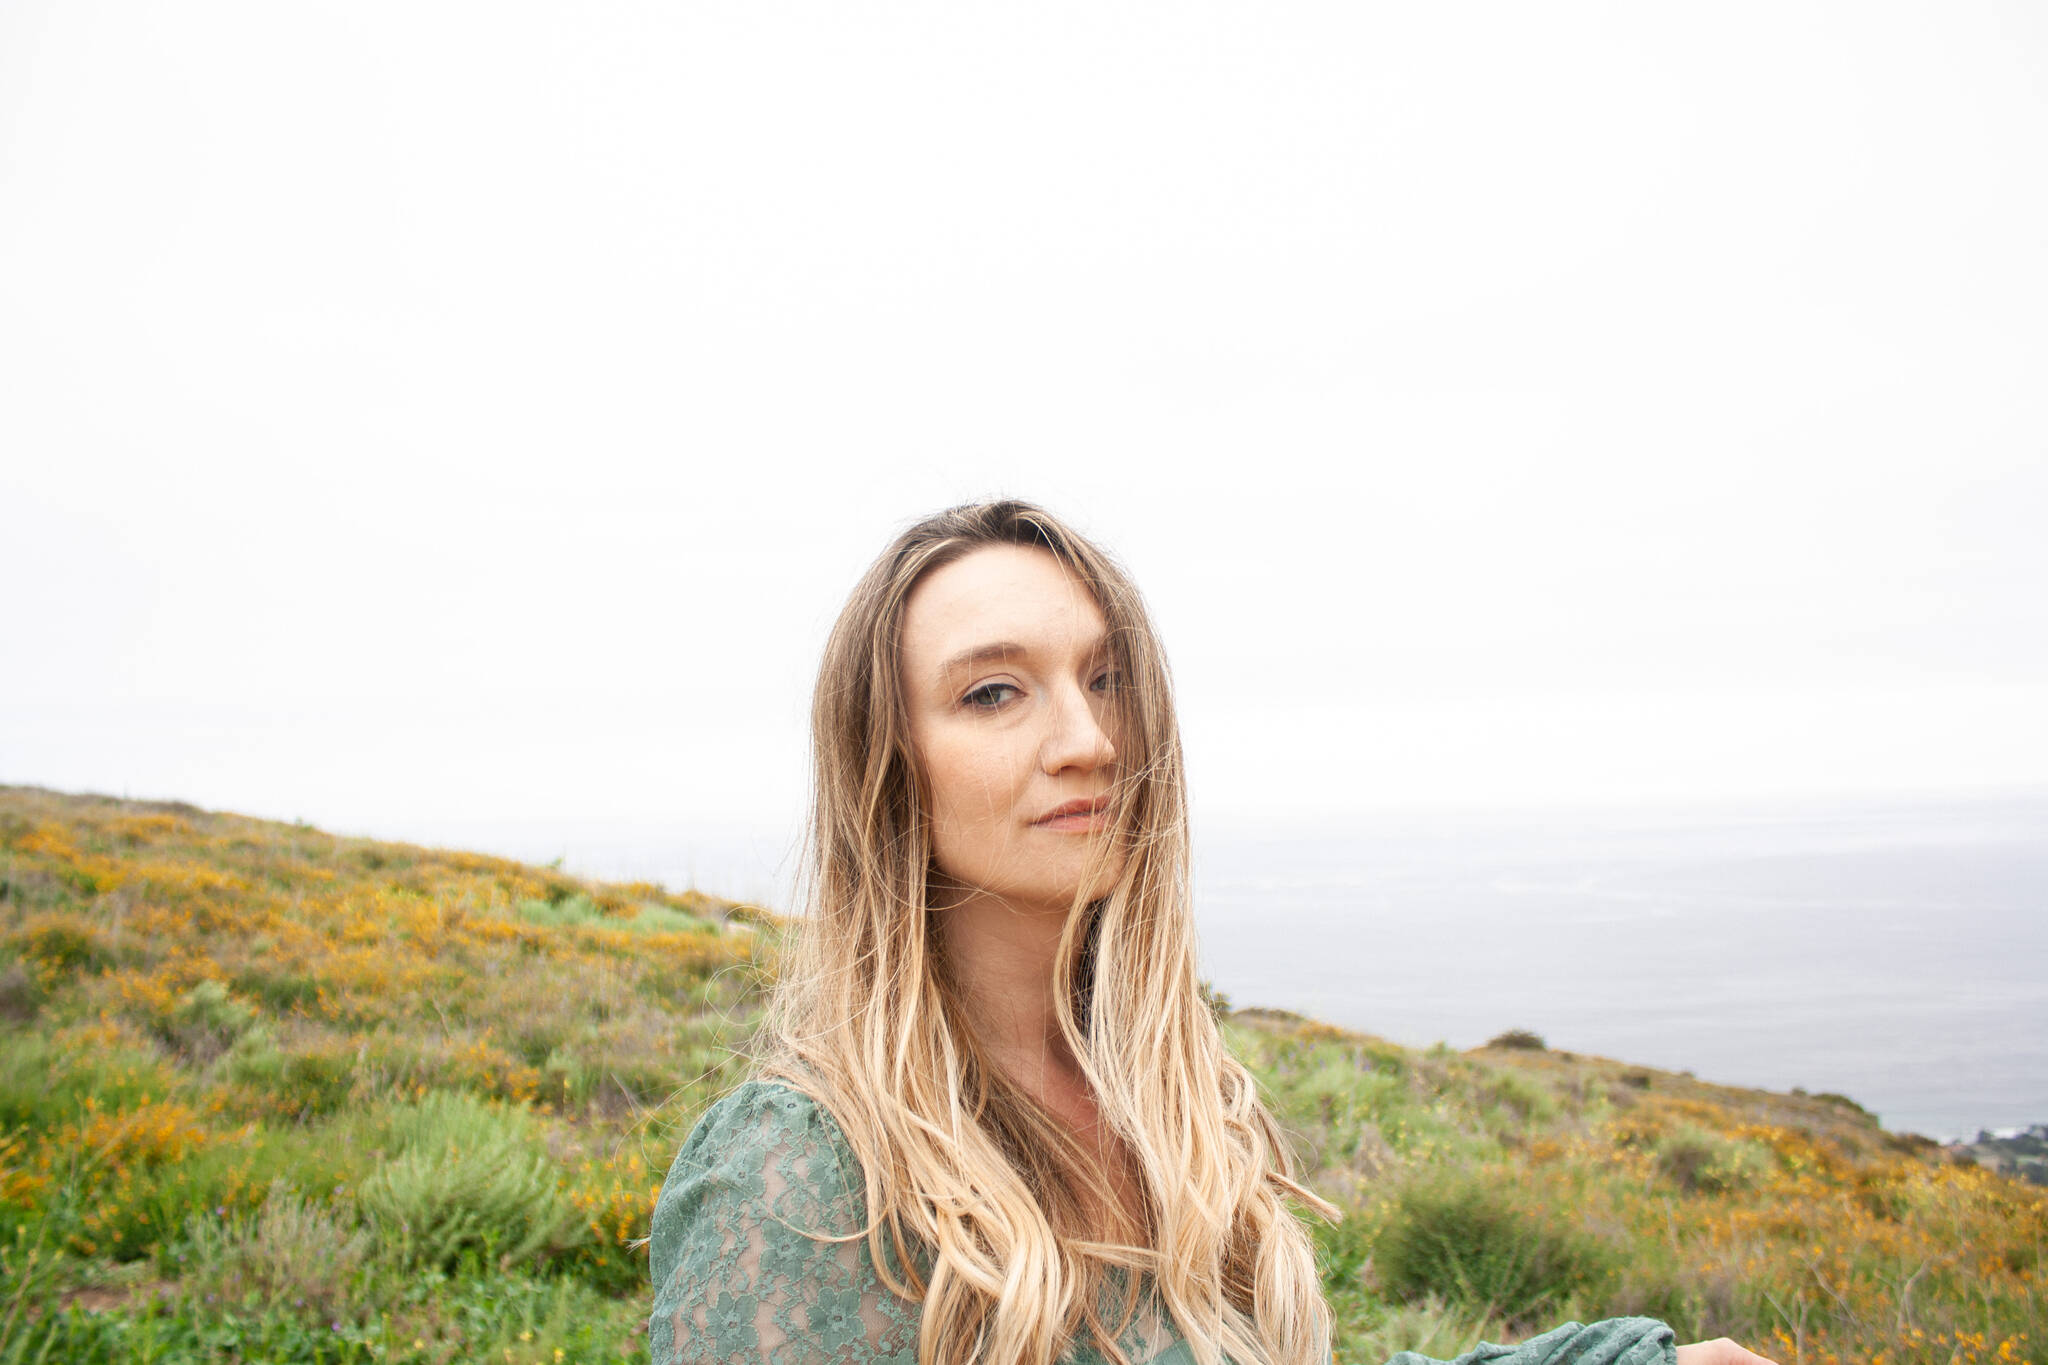 Emily Anderson's second album "Salt & Water" will be released on Friday, May 27. The second album from the L.A.-based  singer-songwriter from Fairbanks deals with challenging emotions via some surprisingly sunny tunes. (Courtesy Photo / Chris West)